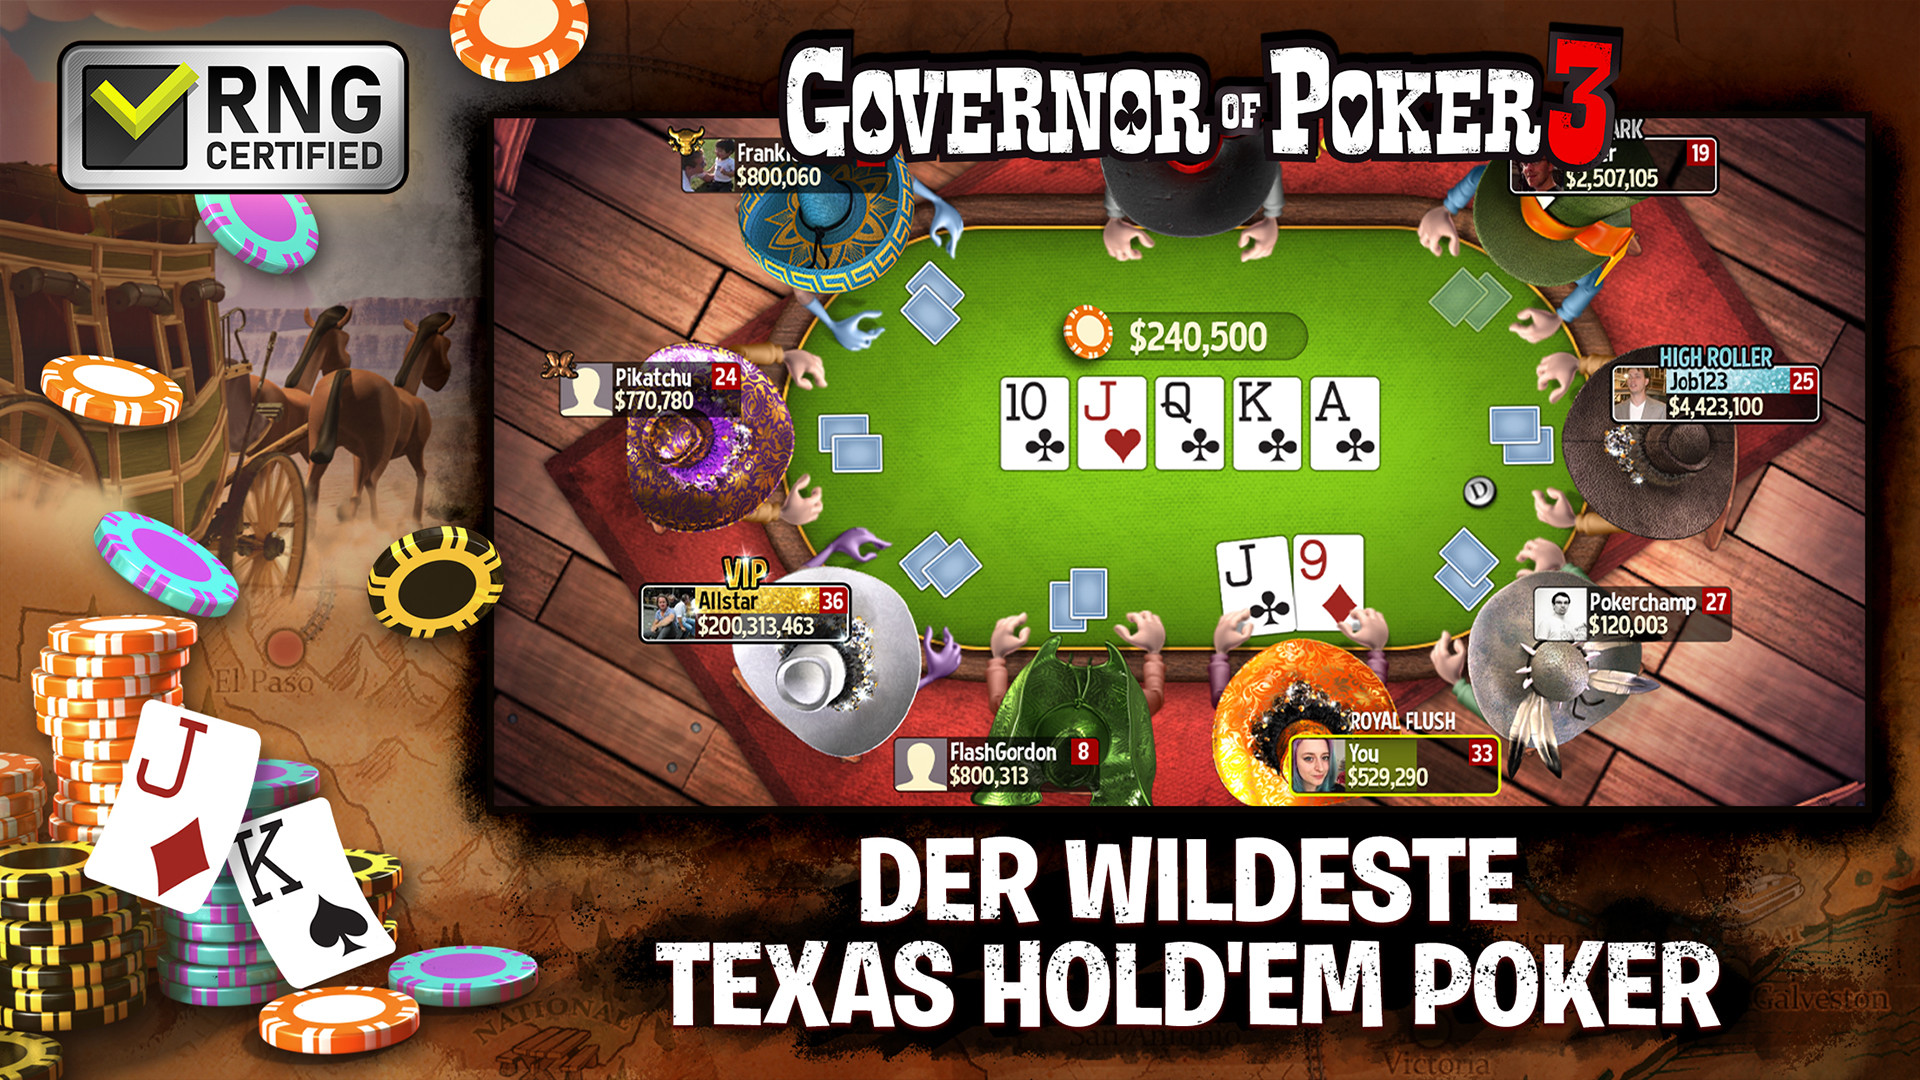 governor of poker 3 cheats 2021